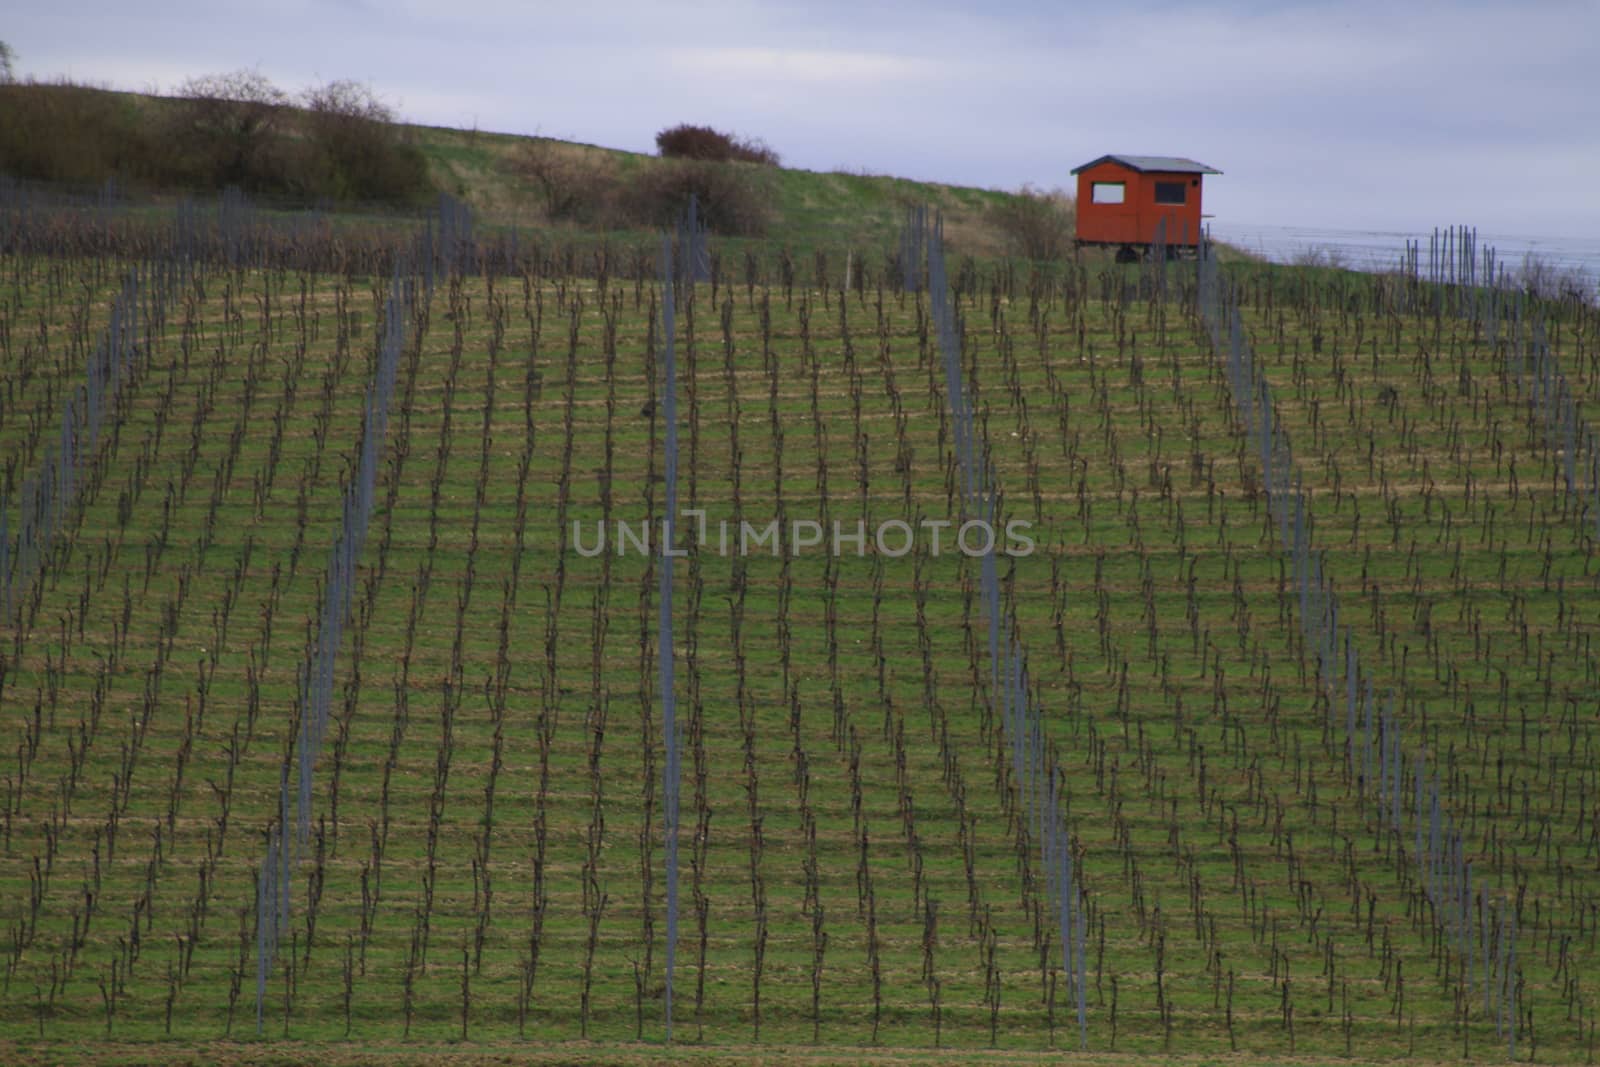 Spring time in Moravia Tuscany, South Moravian wine region by Jindrich_Blecha